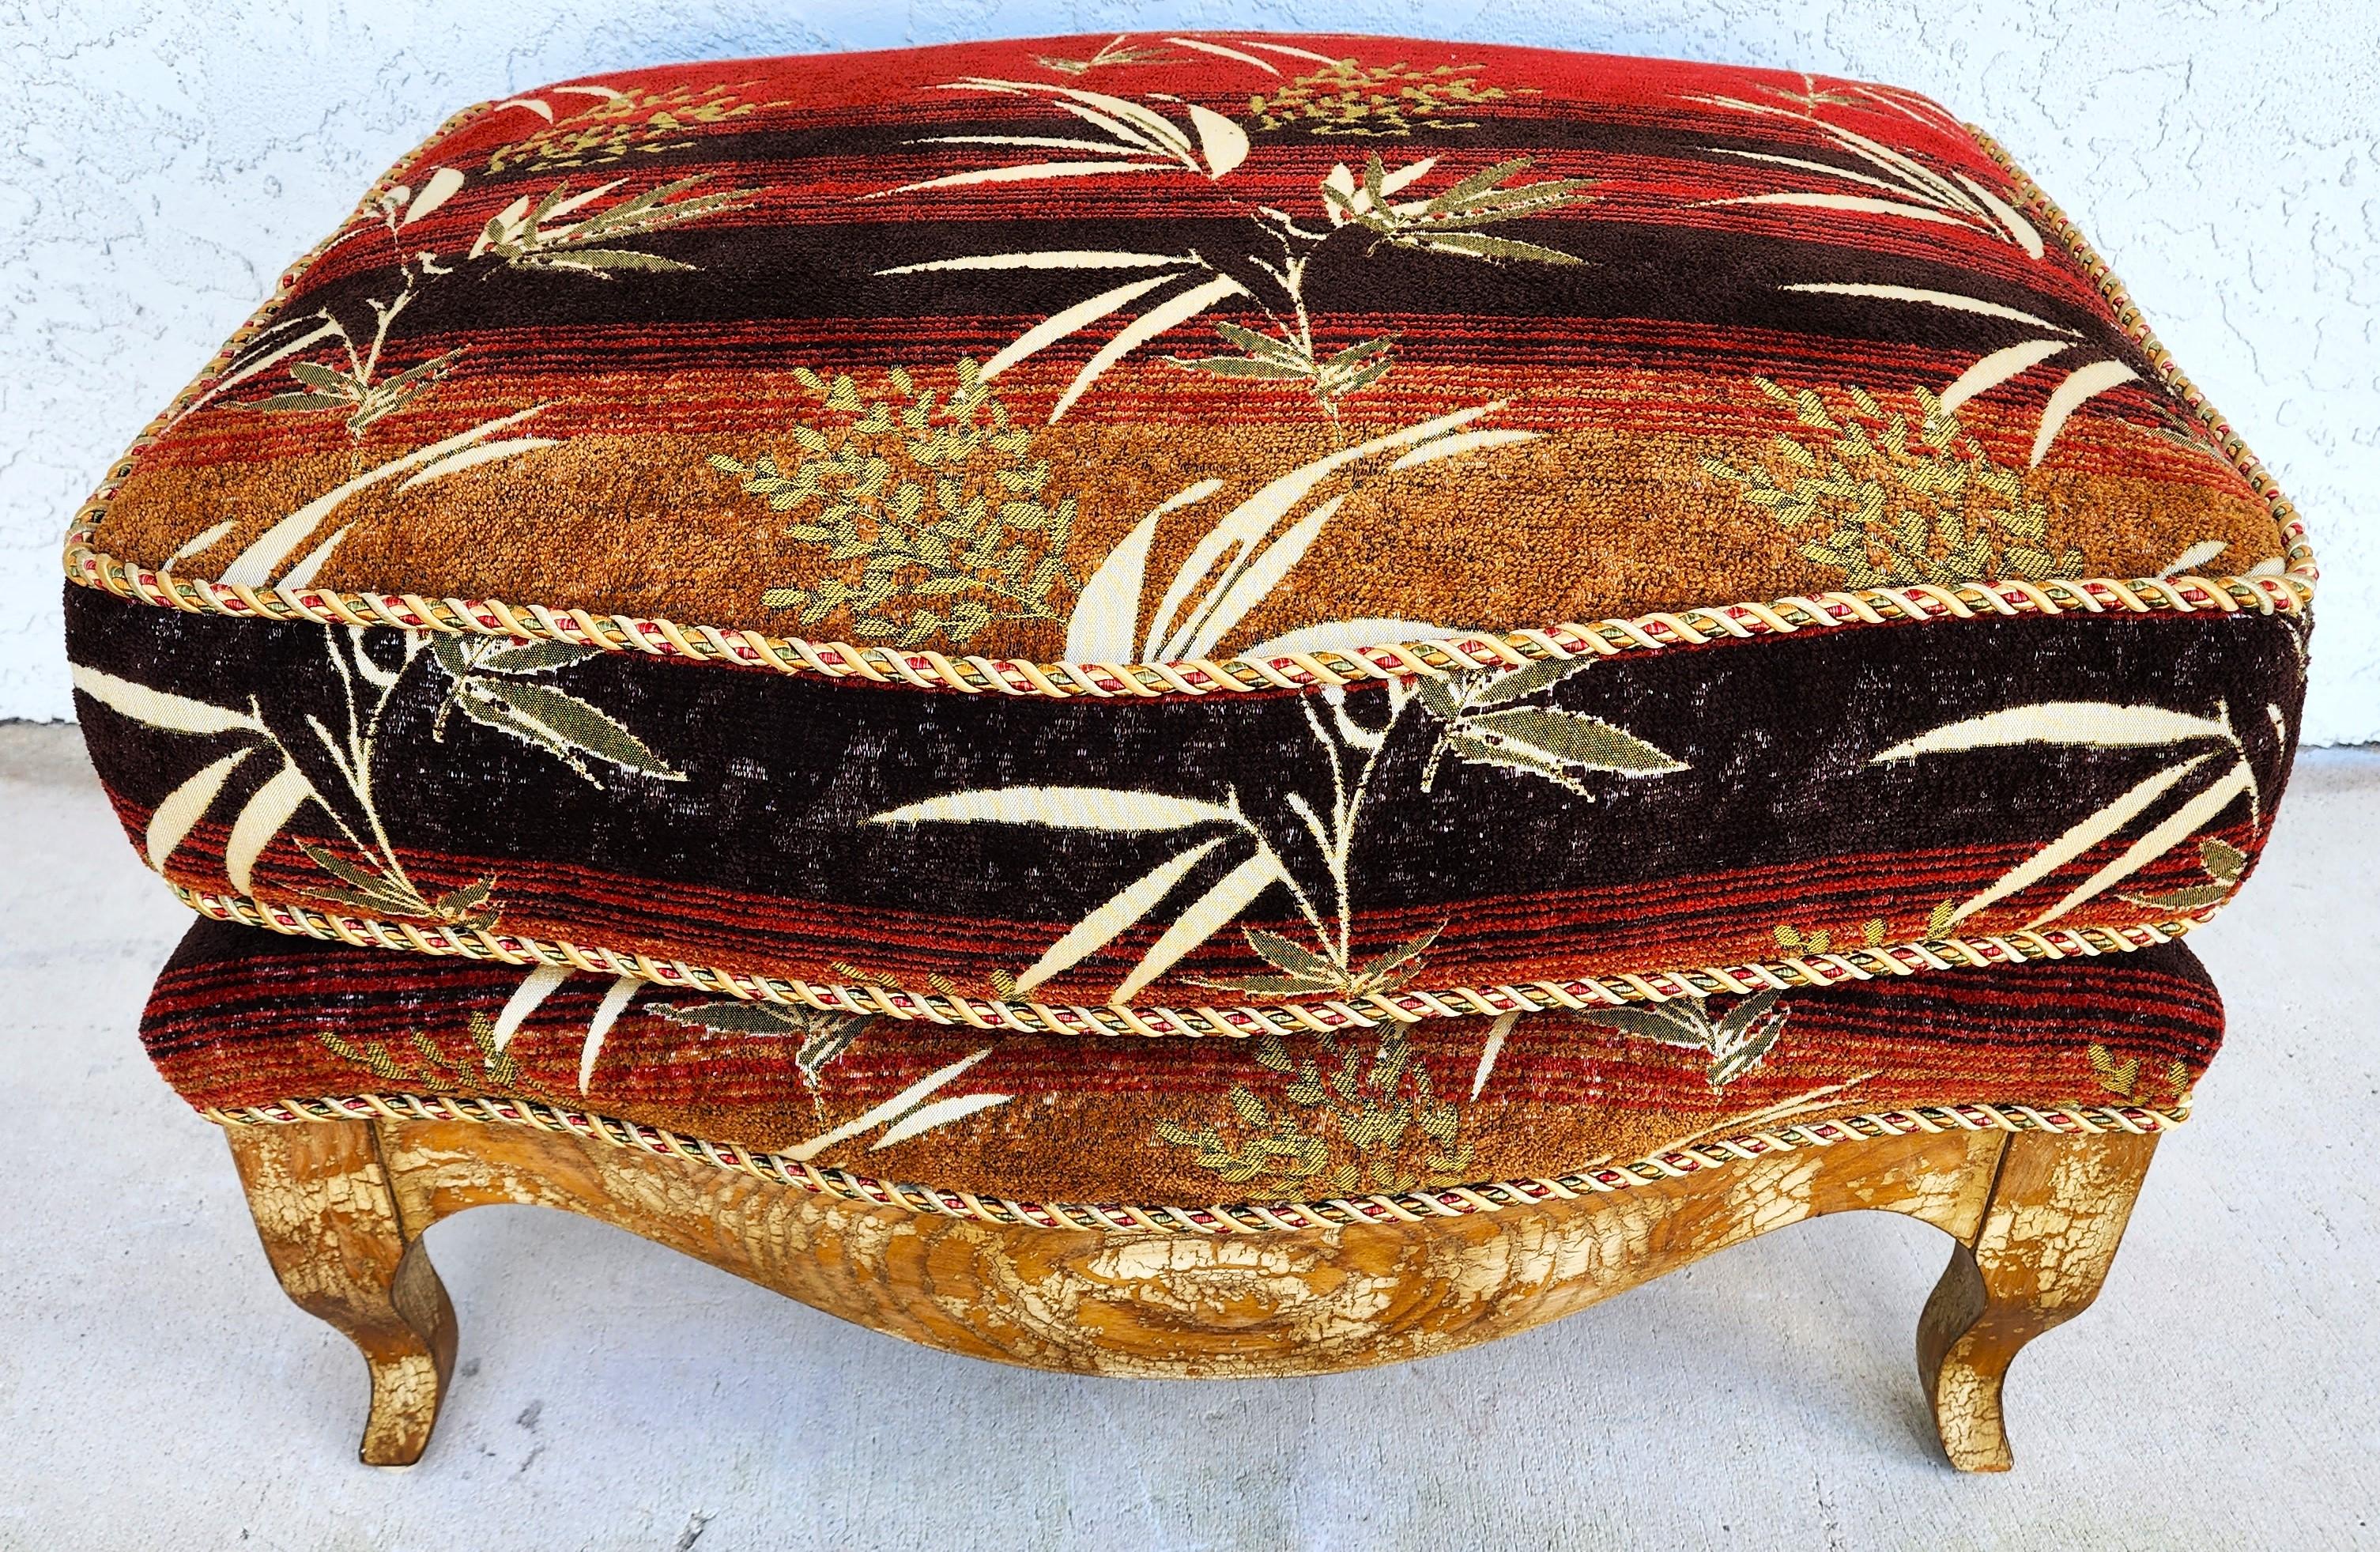 For FULL item description click on CONTINUE READING at the bottom of this page.

Offering One Of Our Recent Palm Beach Estate Fine Furniture Acquisitions Of A
Palm Beach Tropical Ottoman by SWAIM
Featuring heavy chenille cotton upholstery with